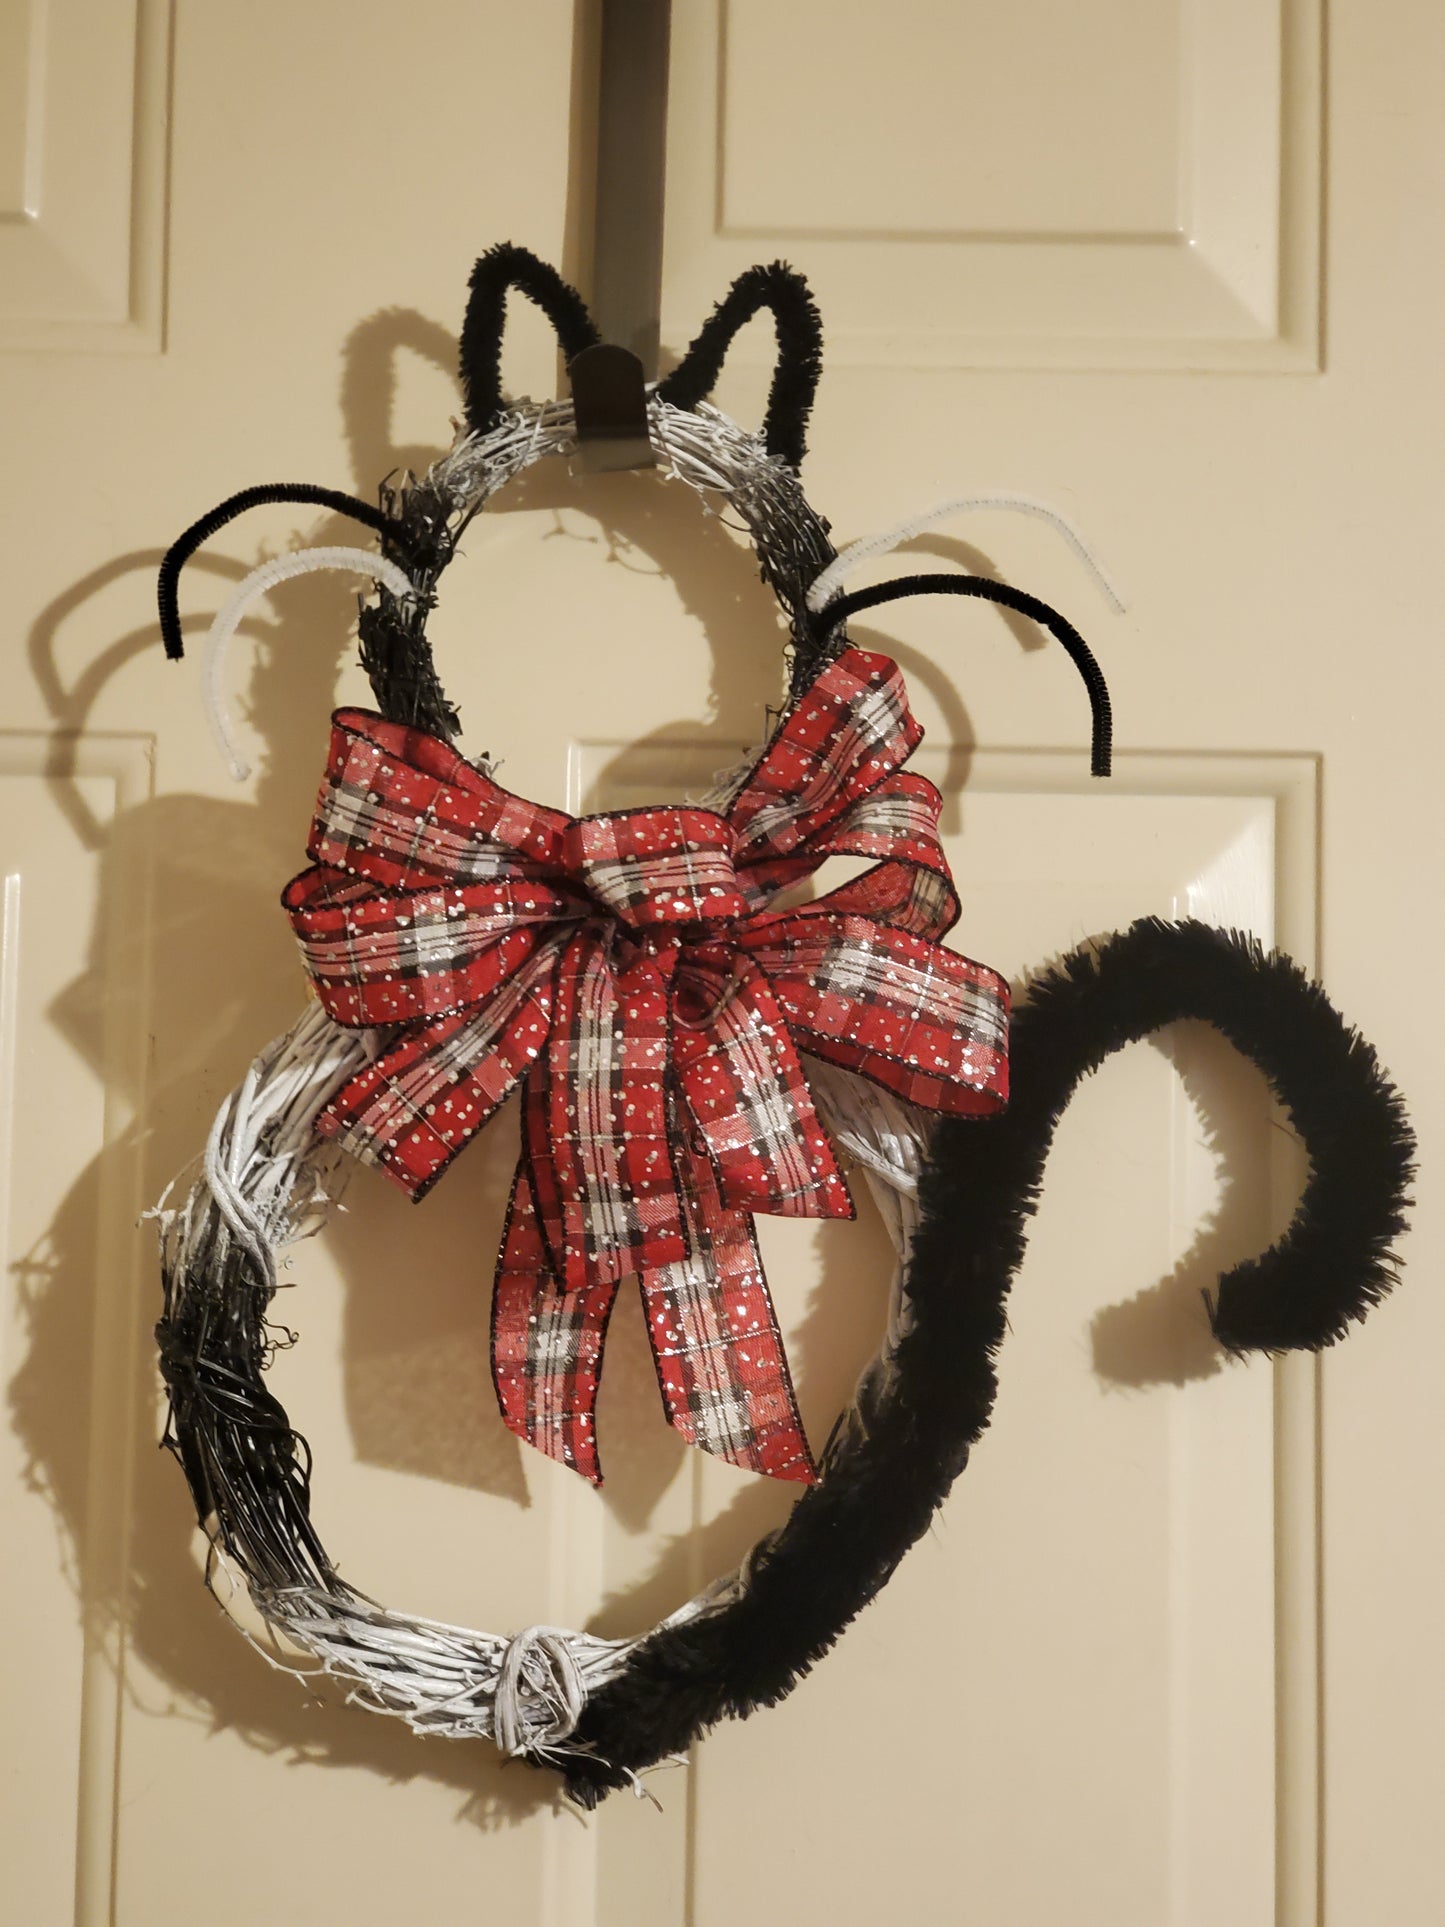 Hillbilly House Panthers Handmade Small Cat Wreath - Hillbilly House Panthers